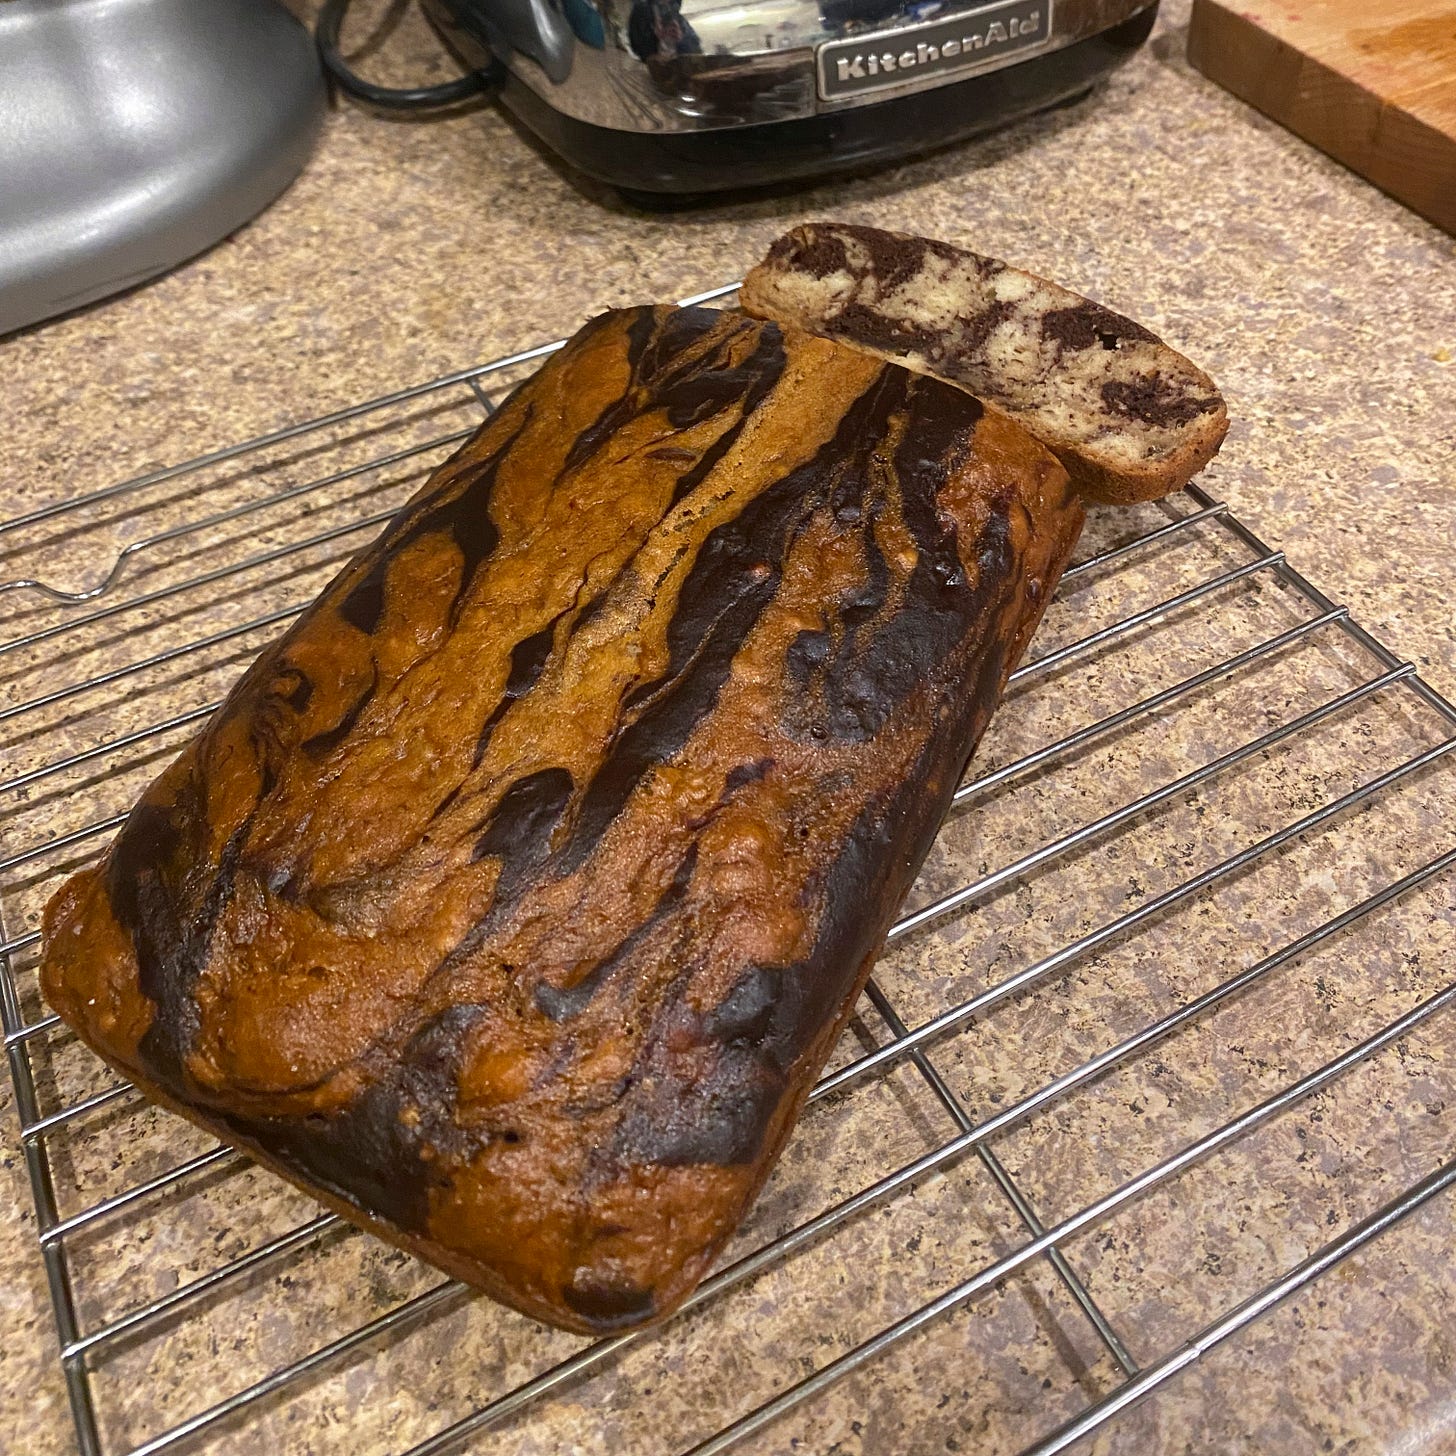 On a wire rack, a marbled loaf of banana bread with the end sliced off.